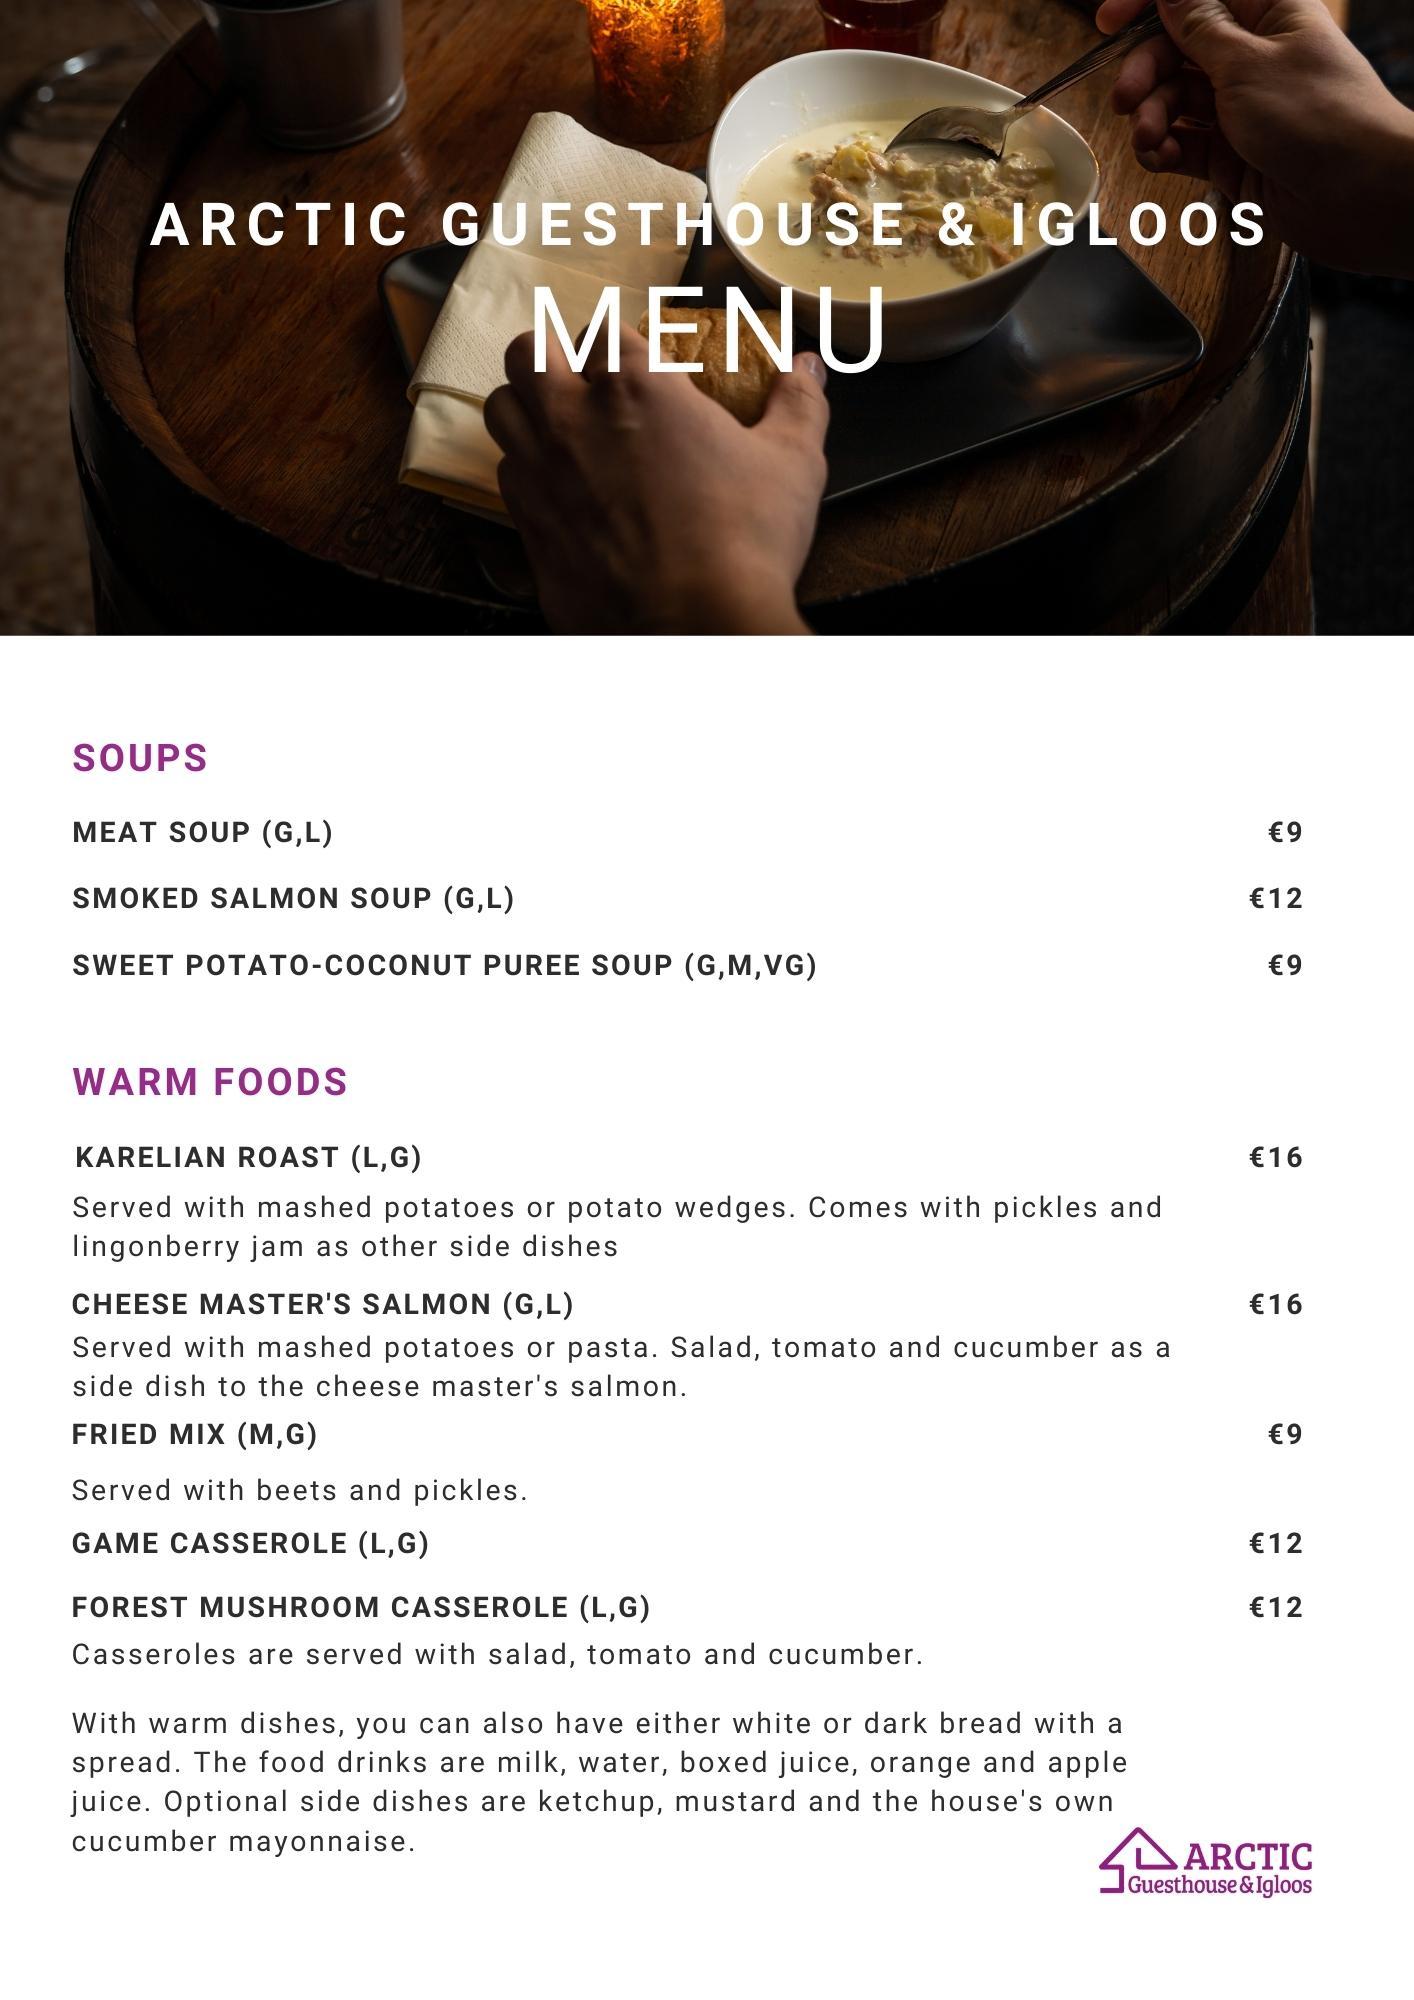 Dinner and lunch menu